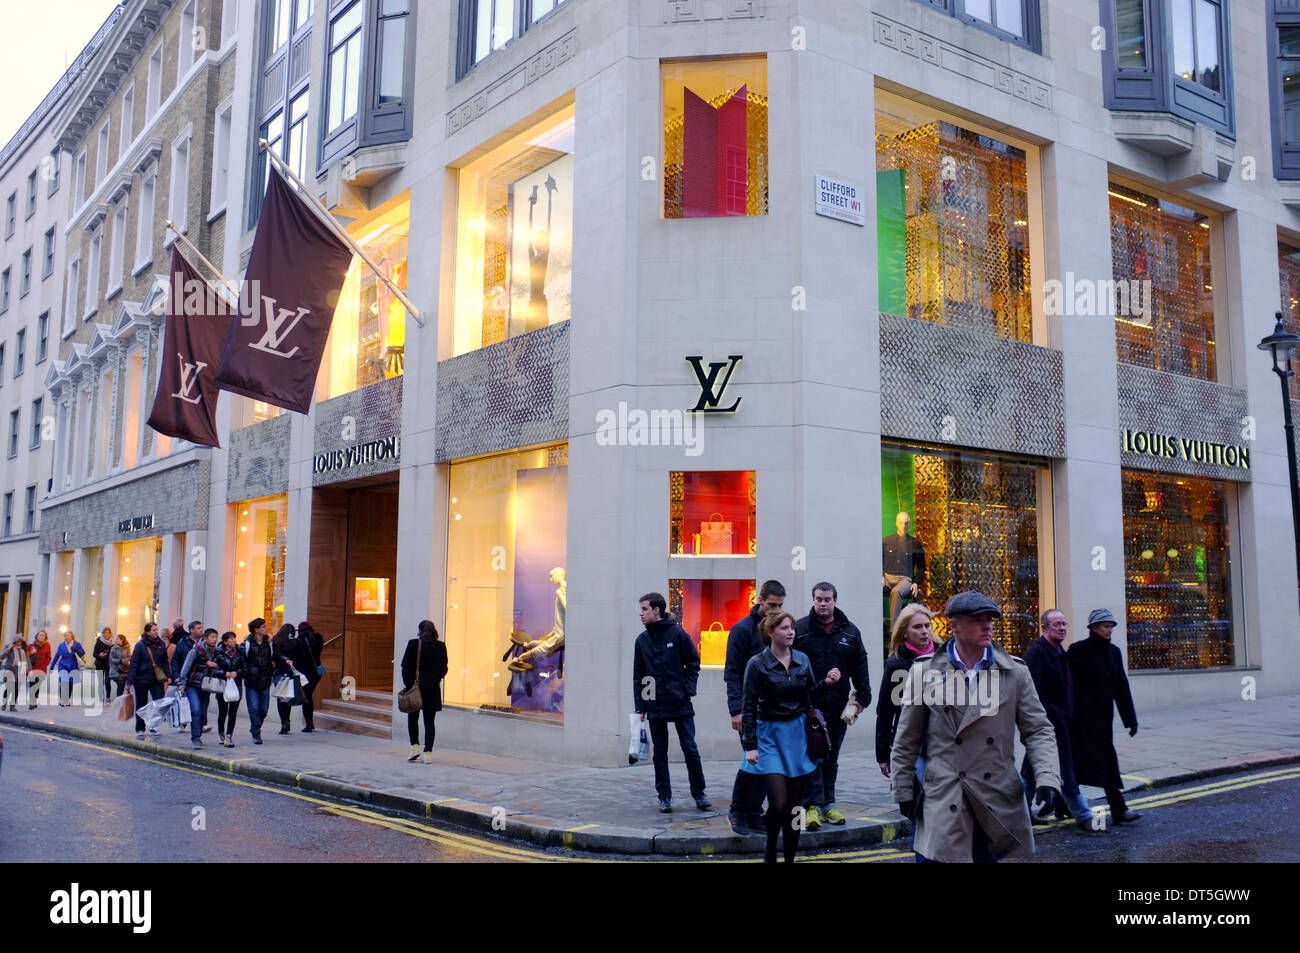 Louis Vuitton - Streeterville - 16 tips from 1833 visitors